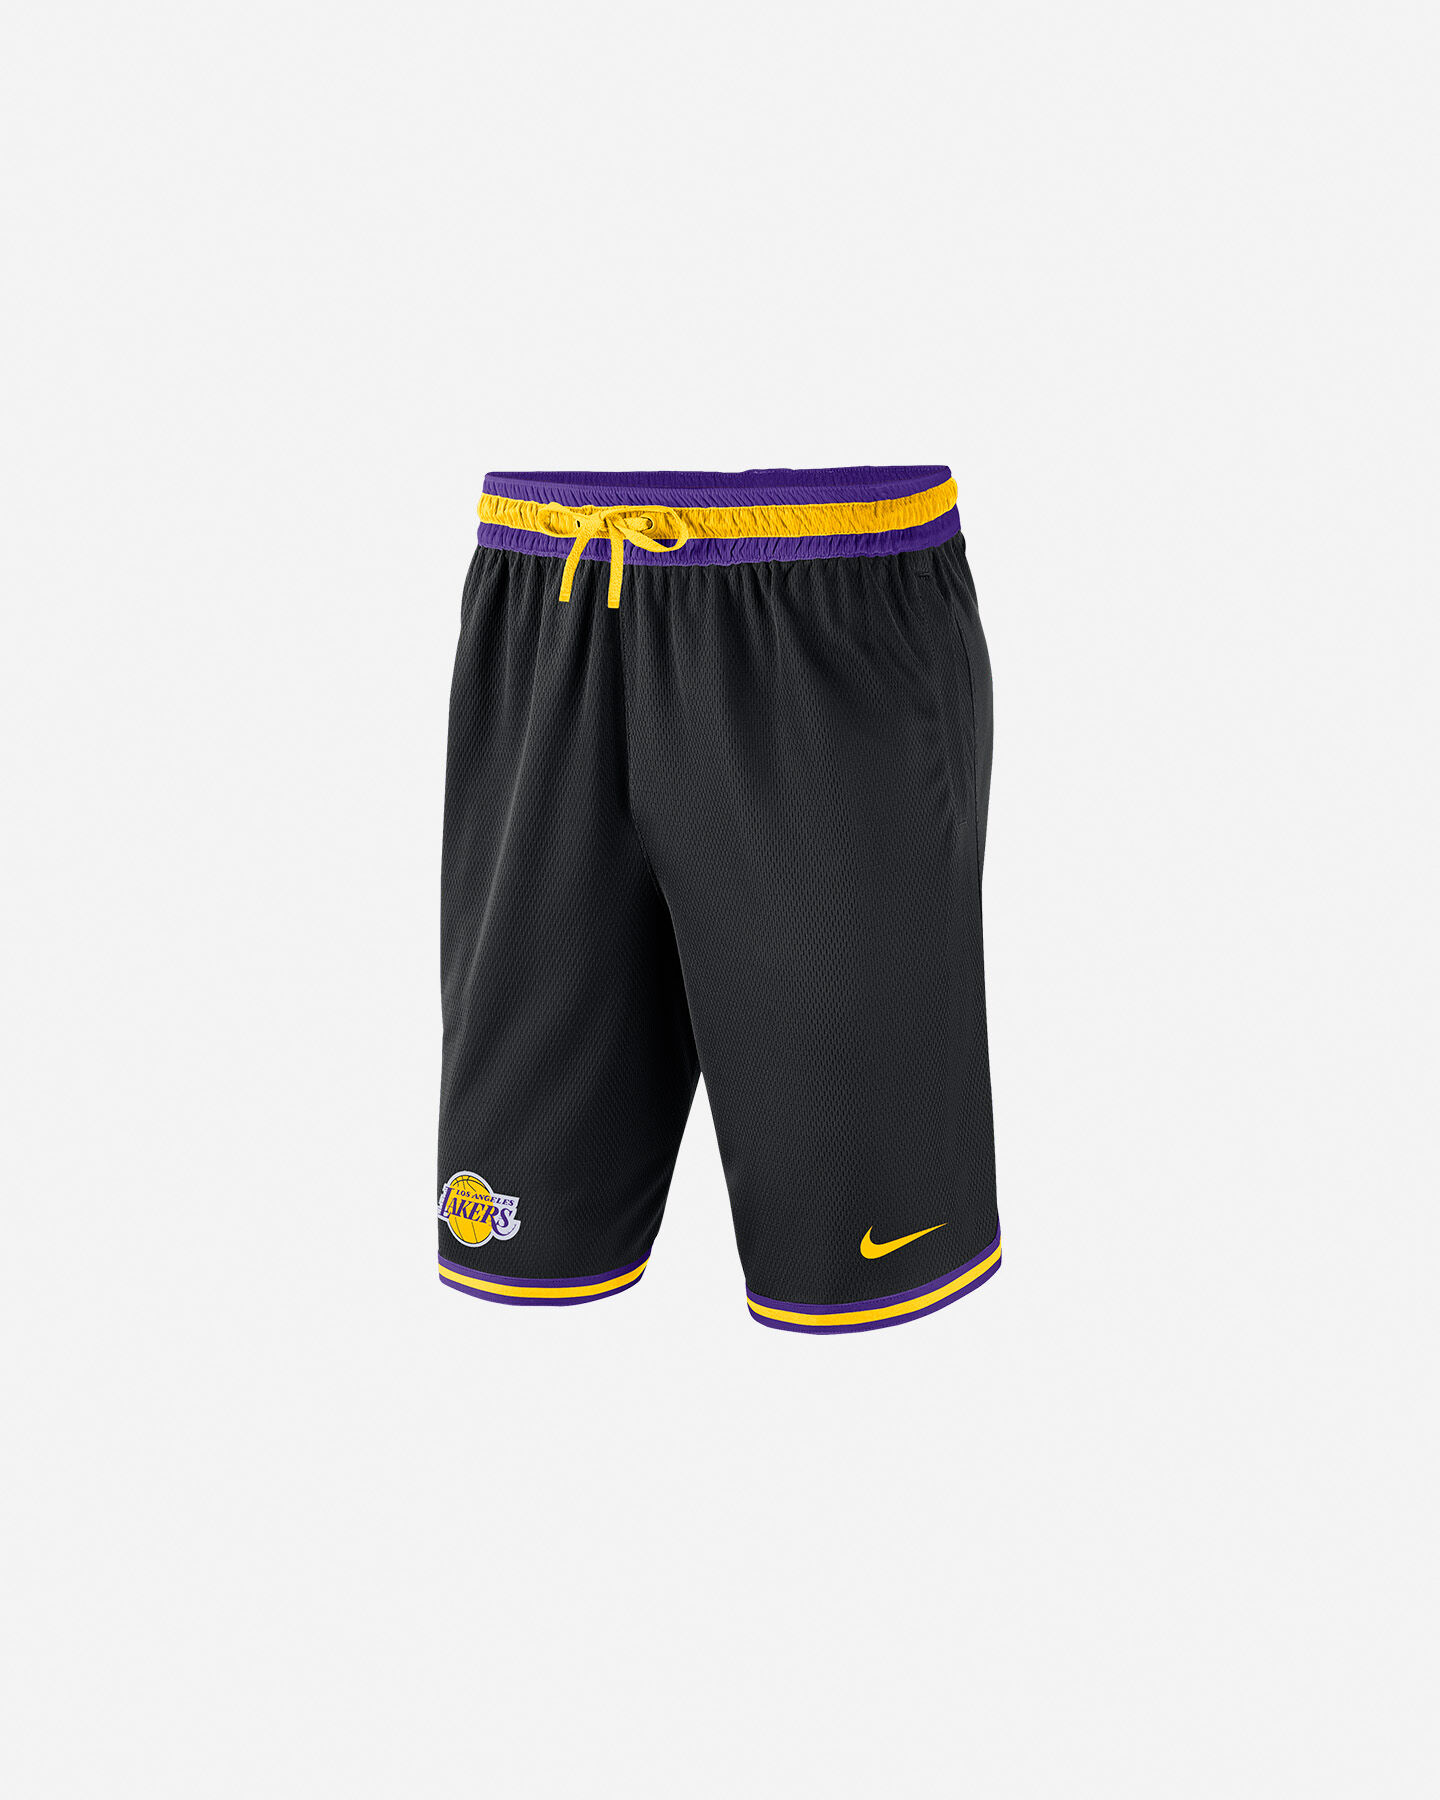  Pantaloncini basket NIKE LOS ANGELES LAKERS M S5084606|010|S scatto 0